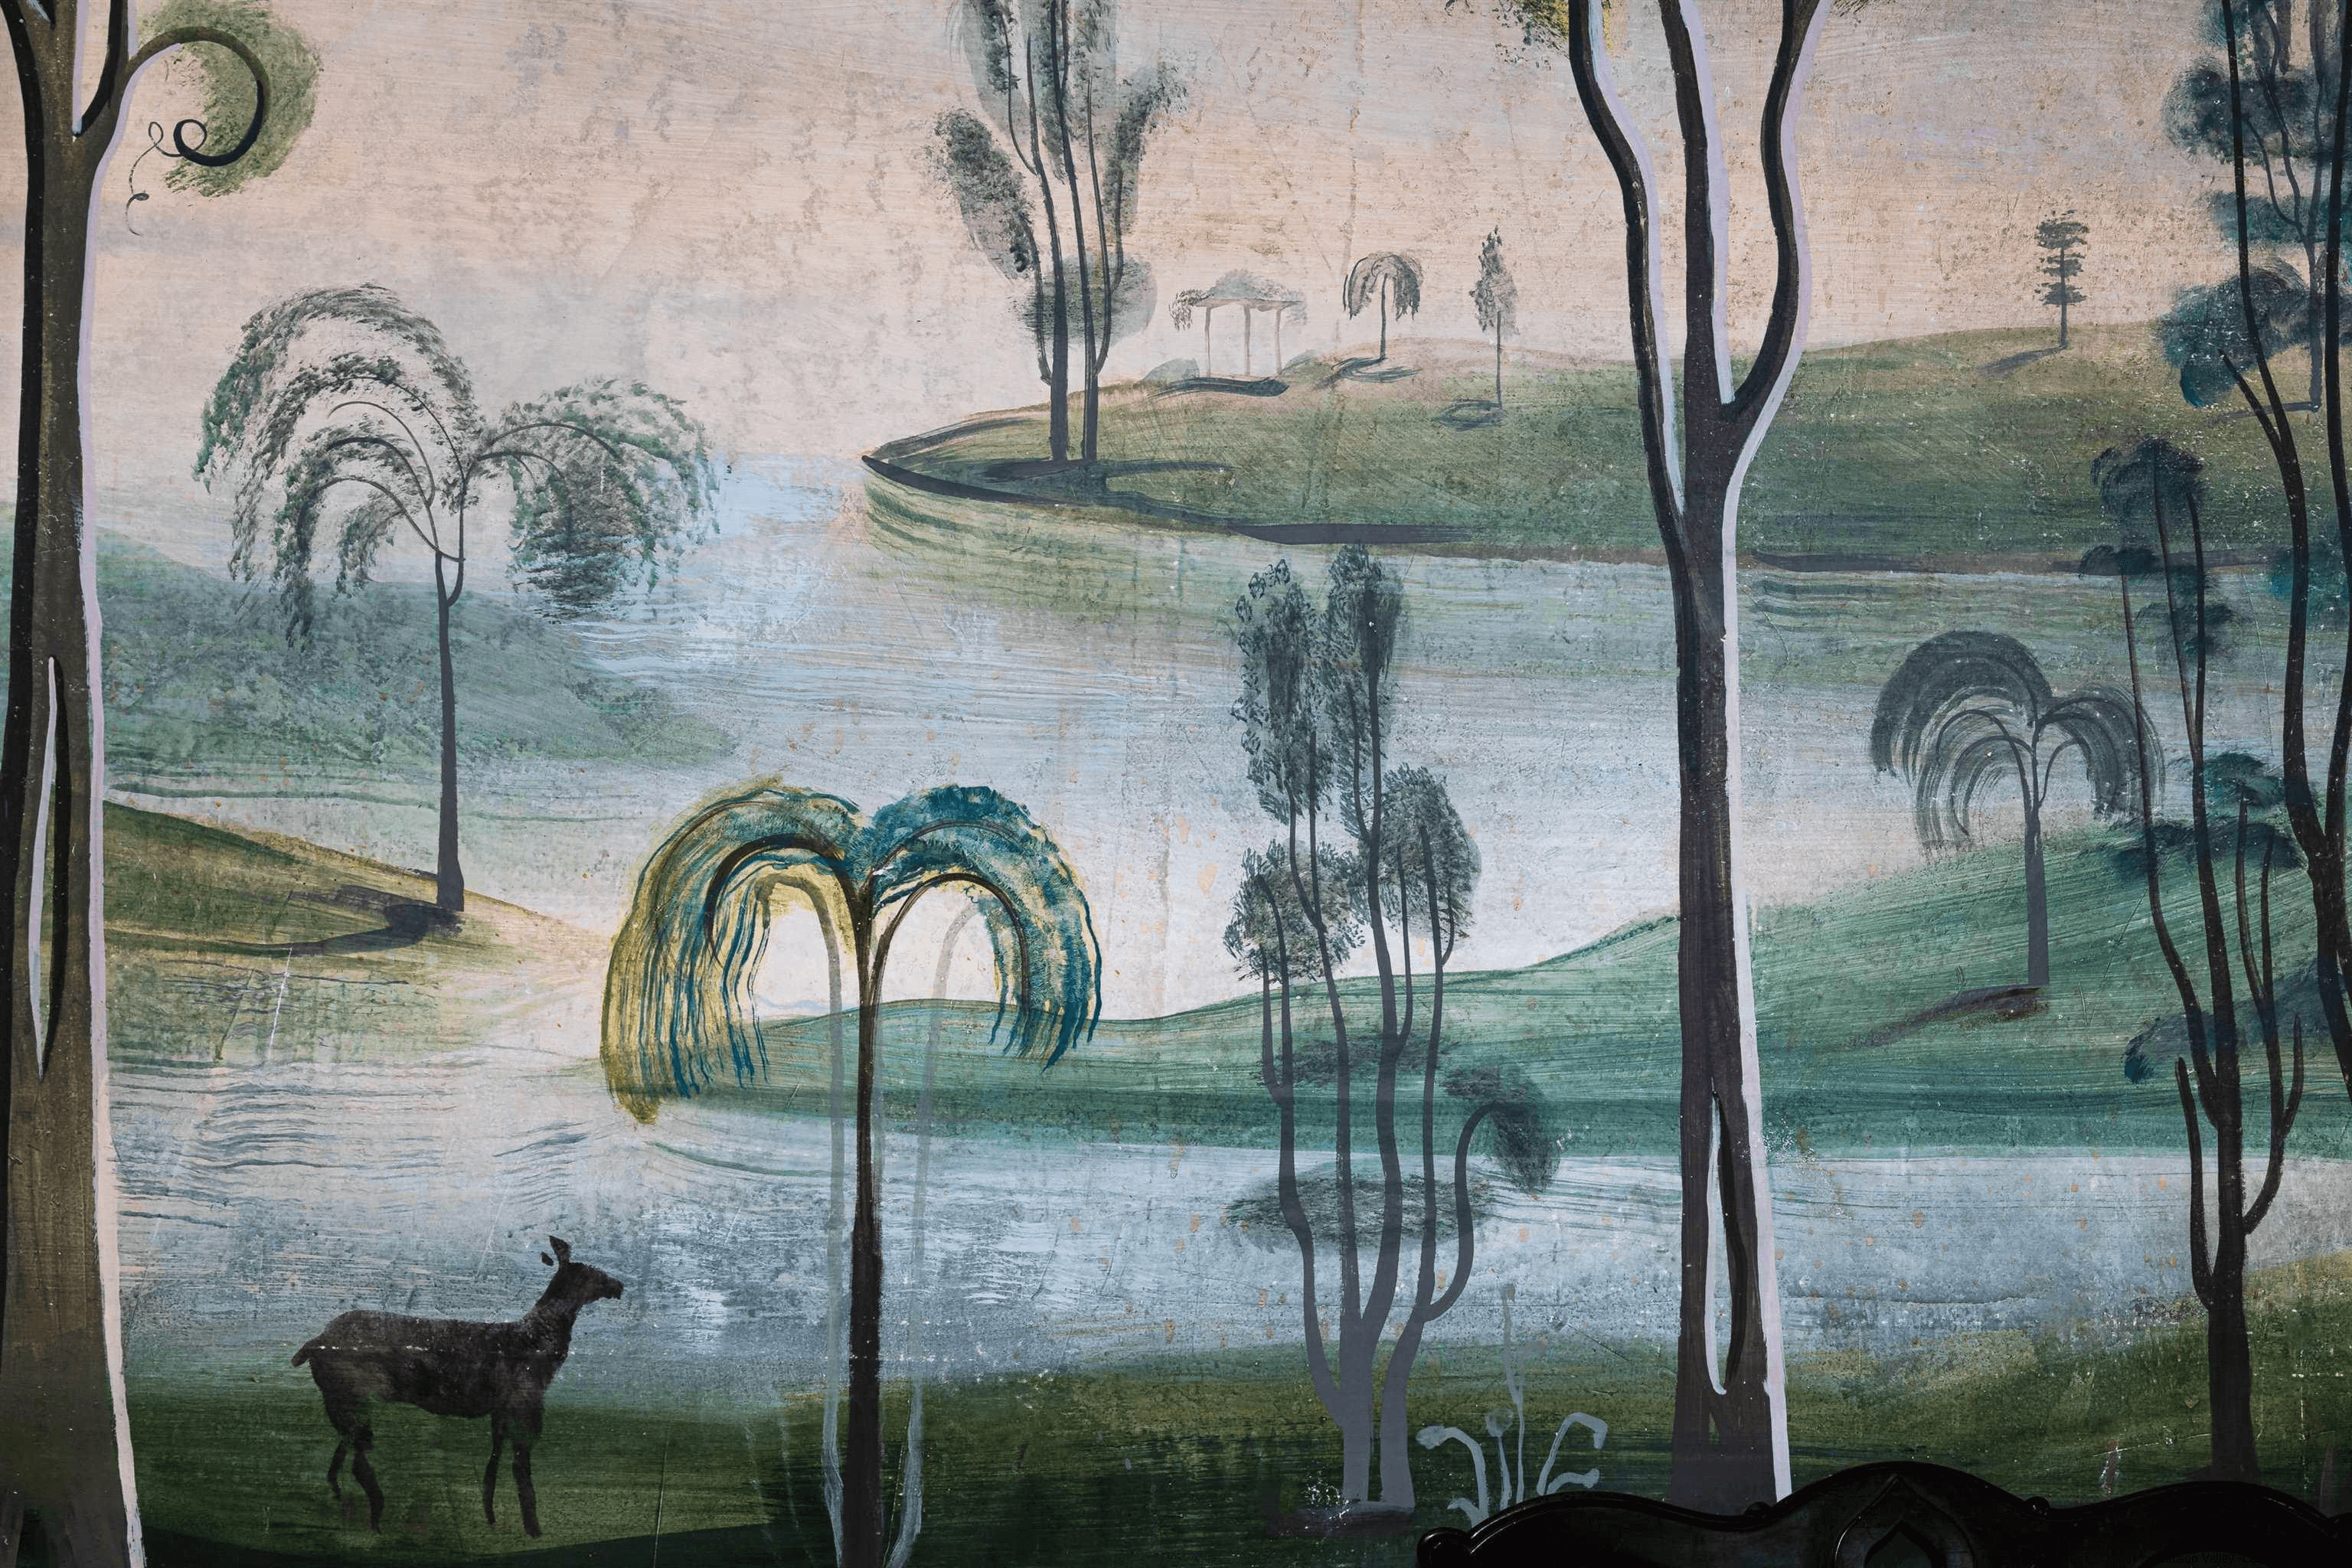 detail of the handpainted mural with trees and a deer